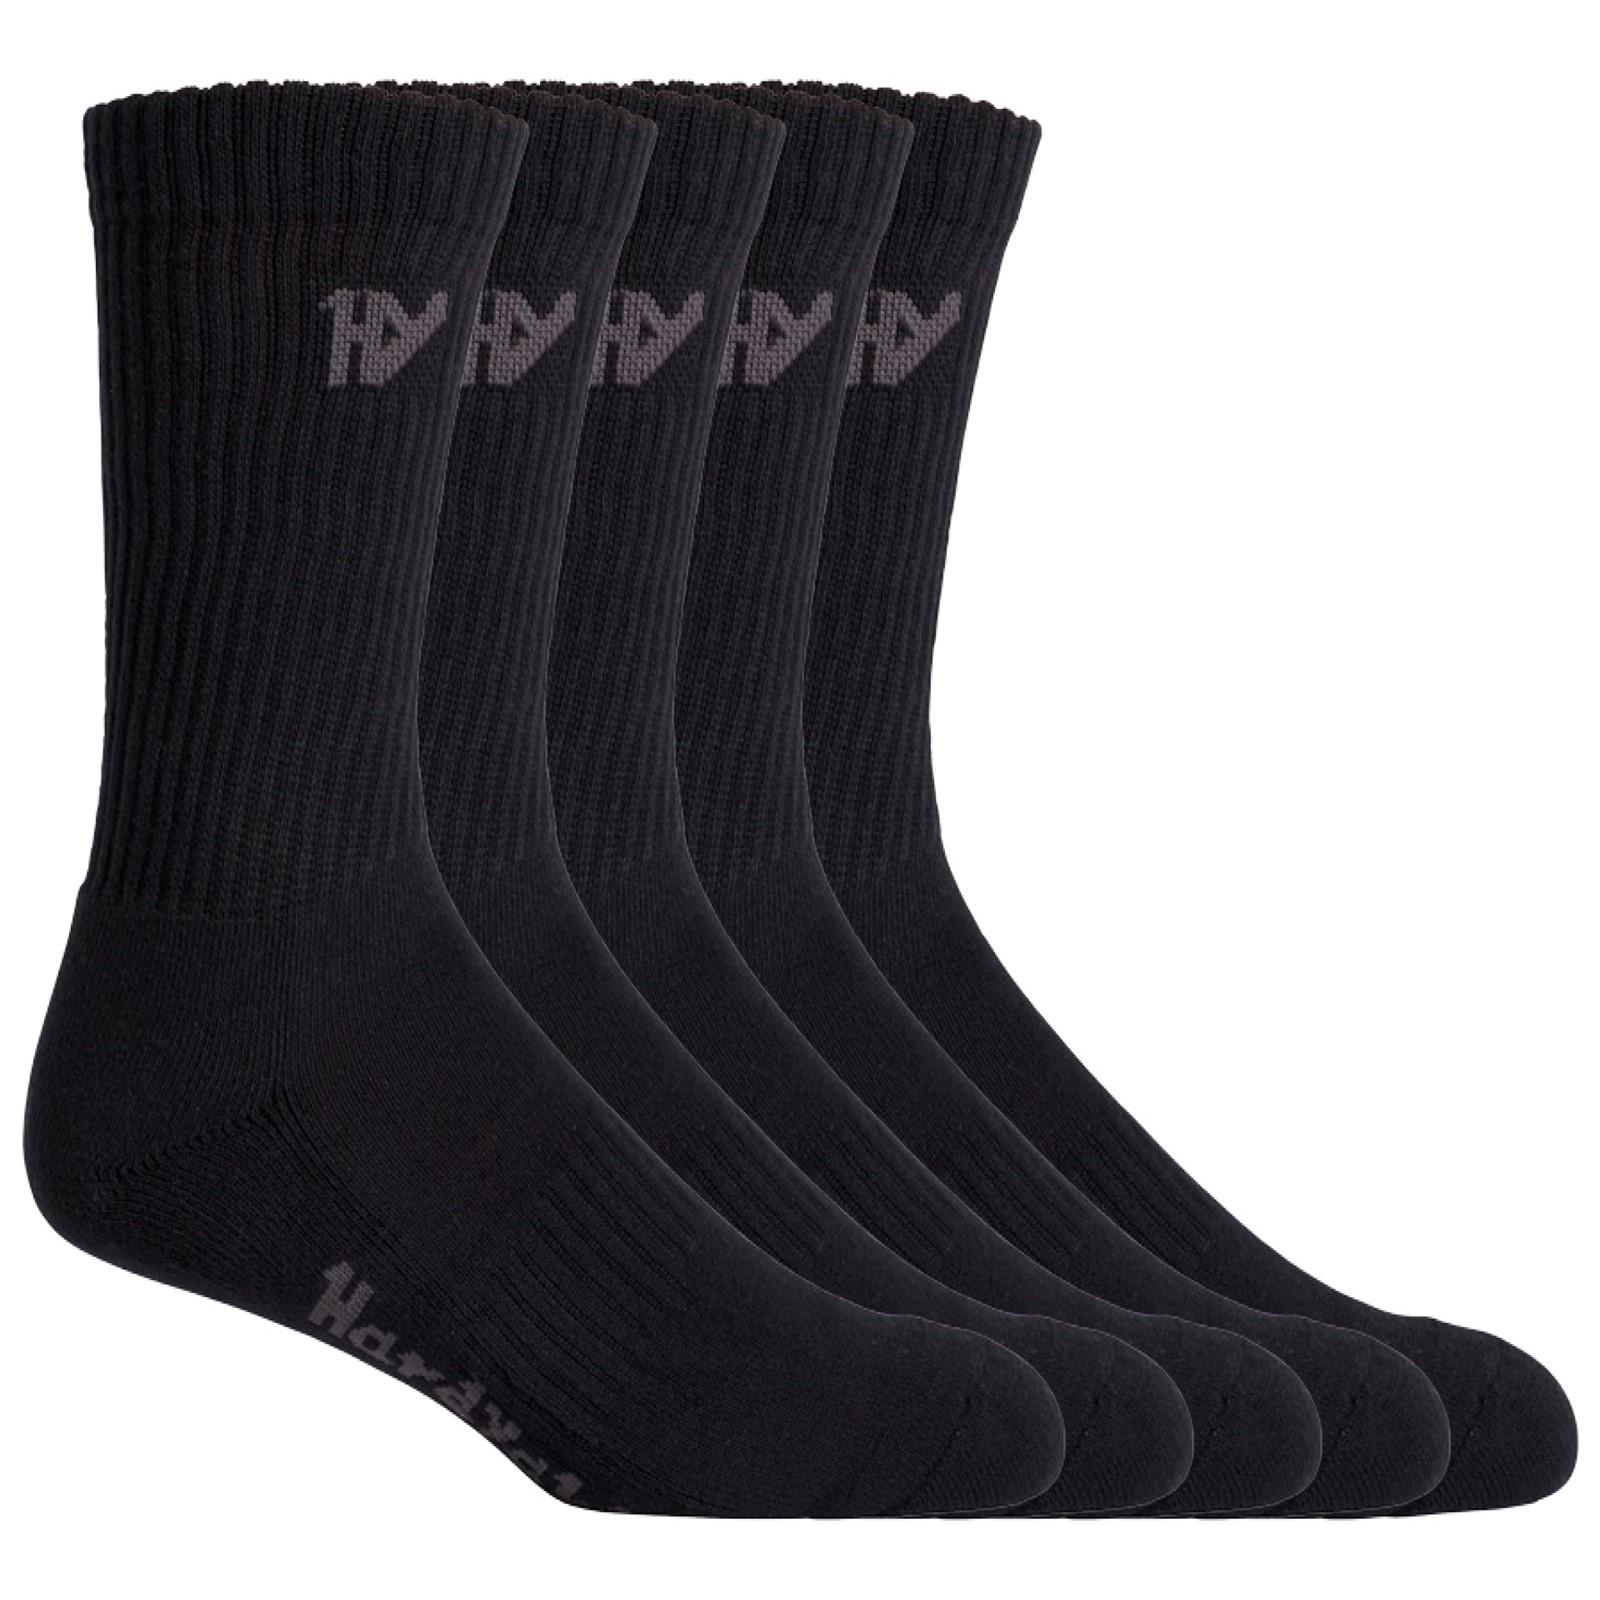 Crew Five Pack Worksock